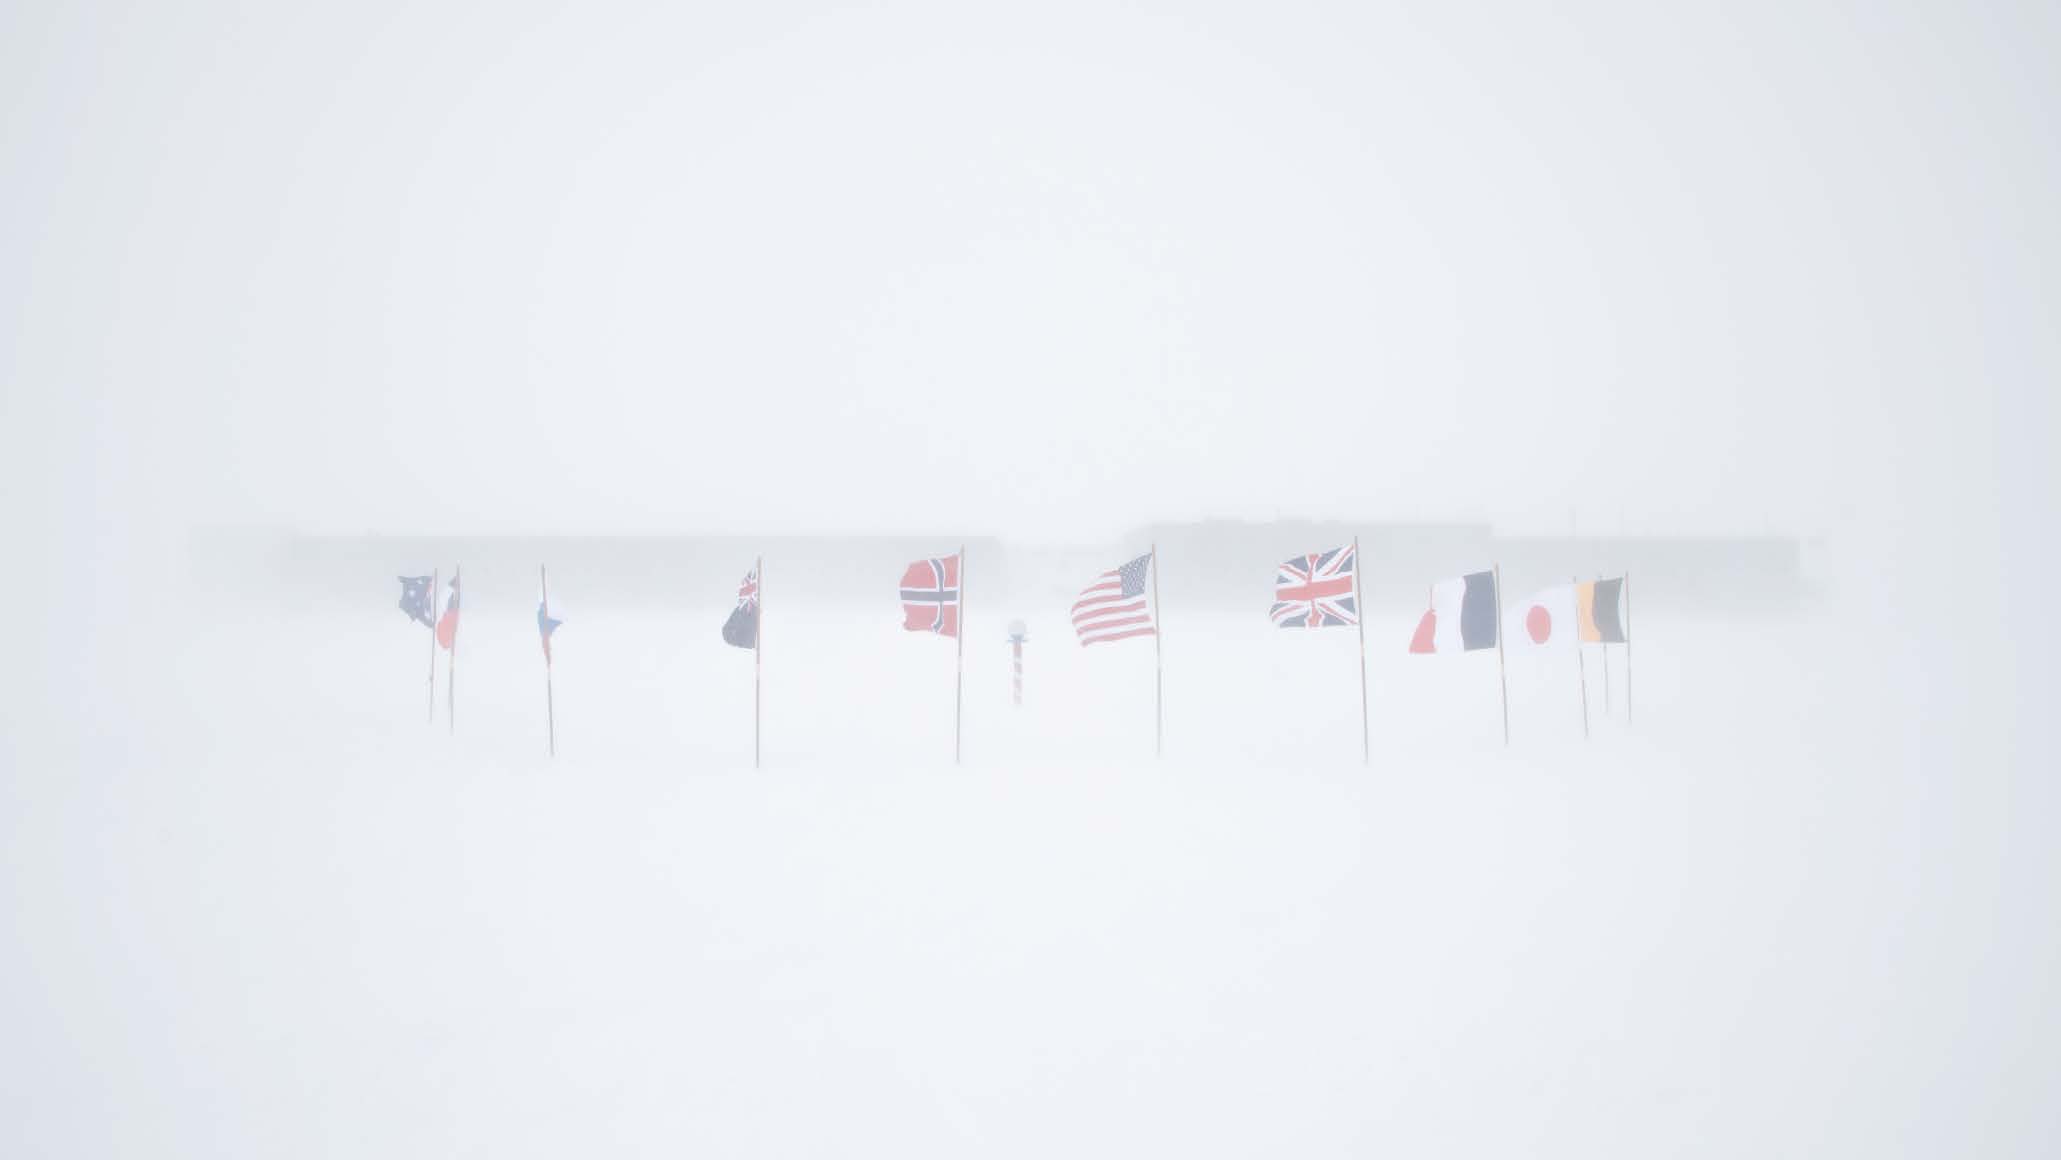 Low visibility, flags billowing with South Pole station blurred in background